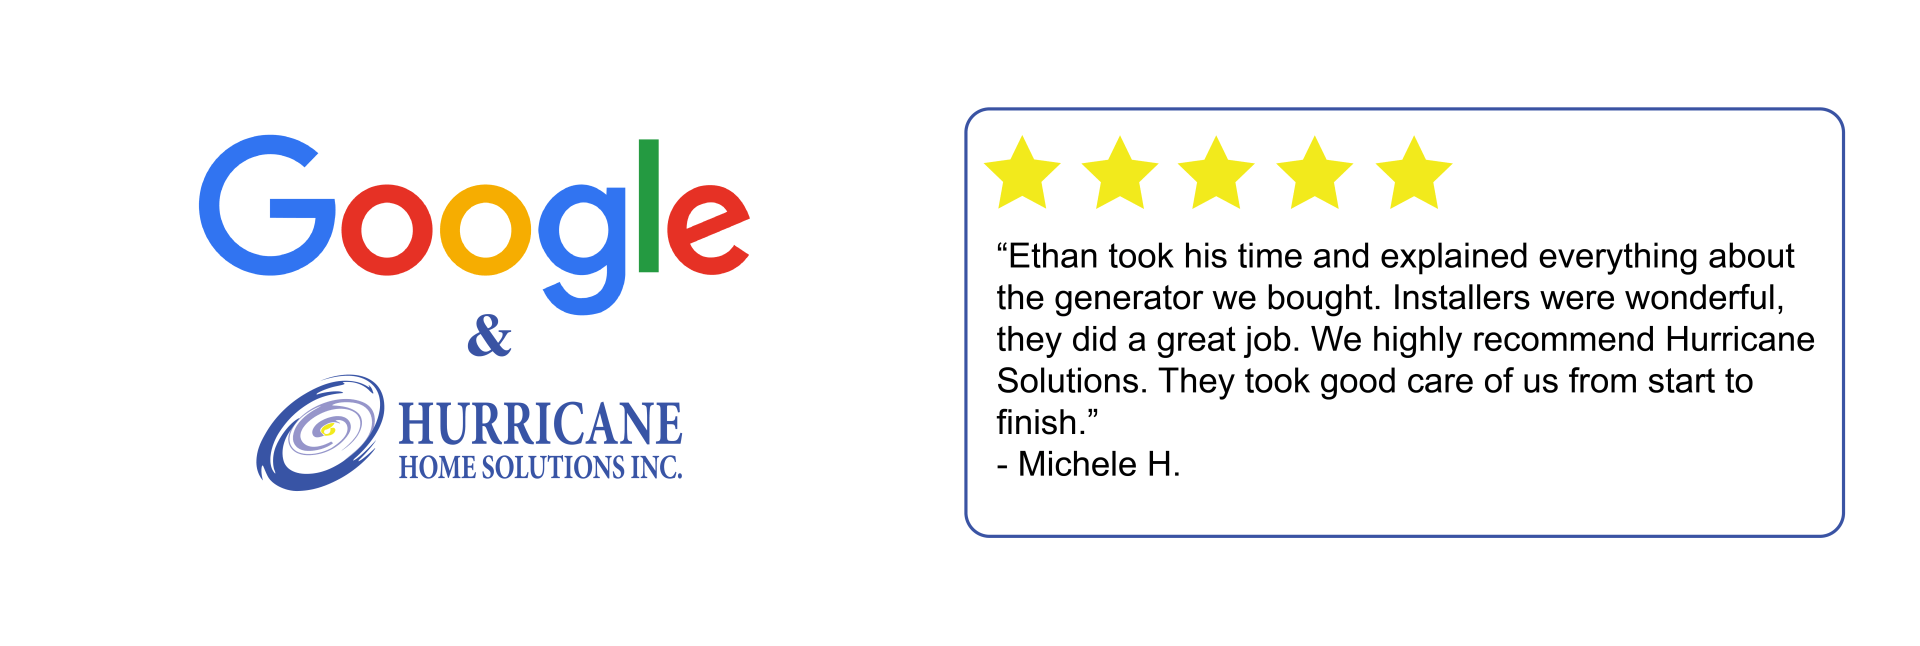 A 5-Star Review on Google for Hurricane Home Solutions